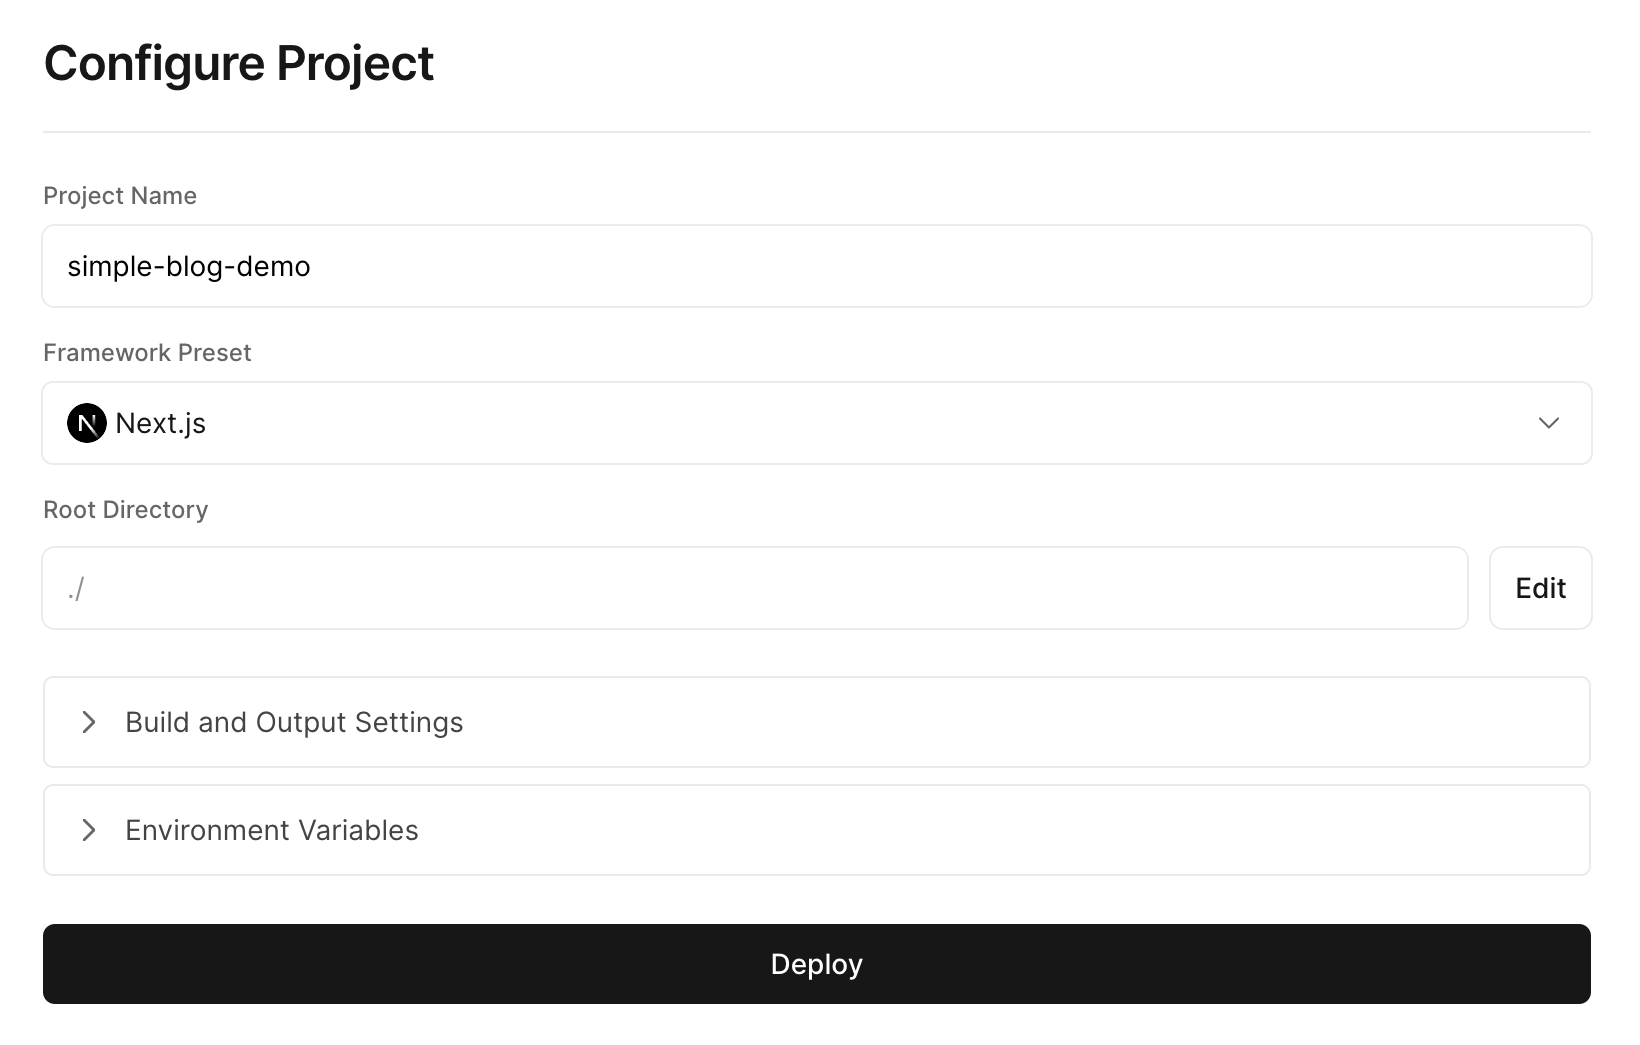 After the import is done, all we have to do is to click Deploy in the Configure Project panel.
